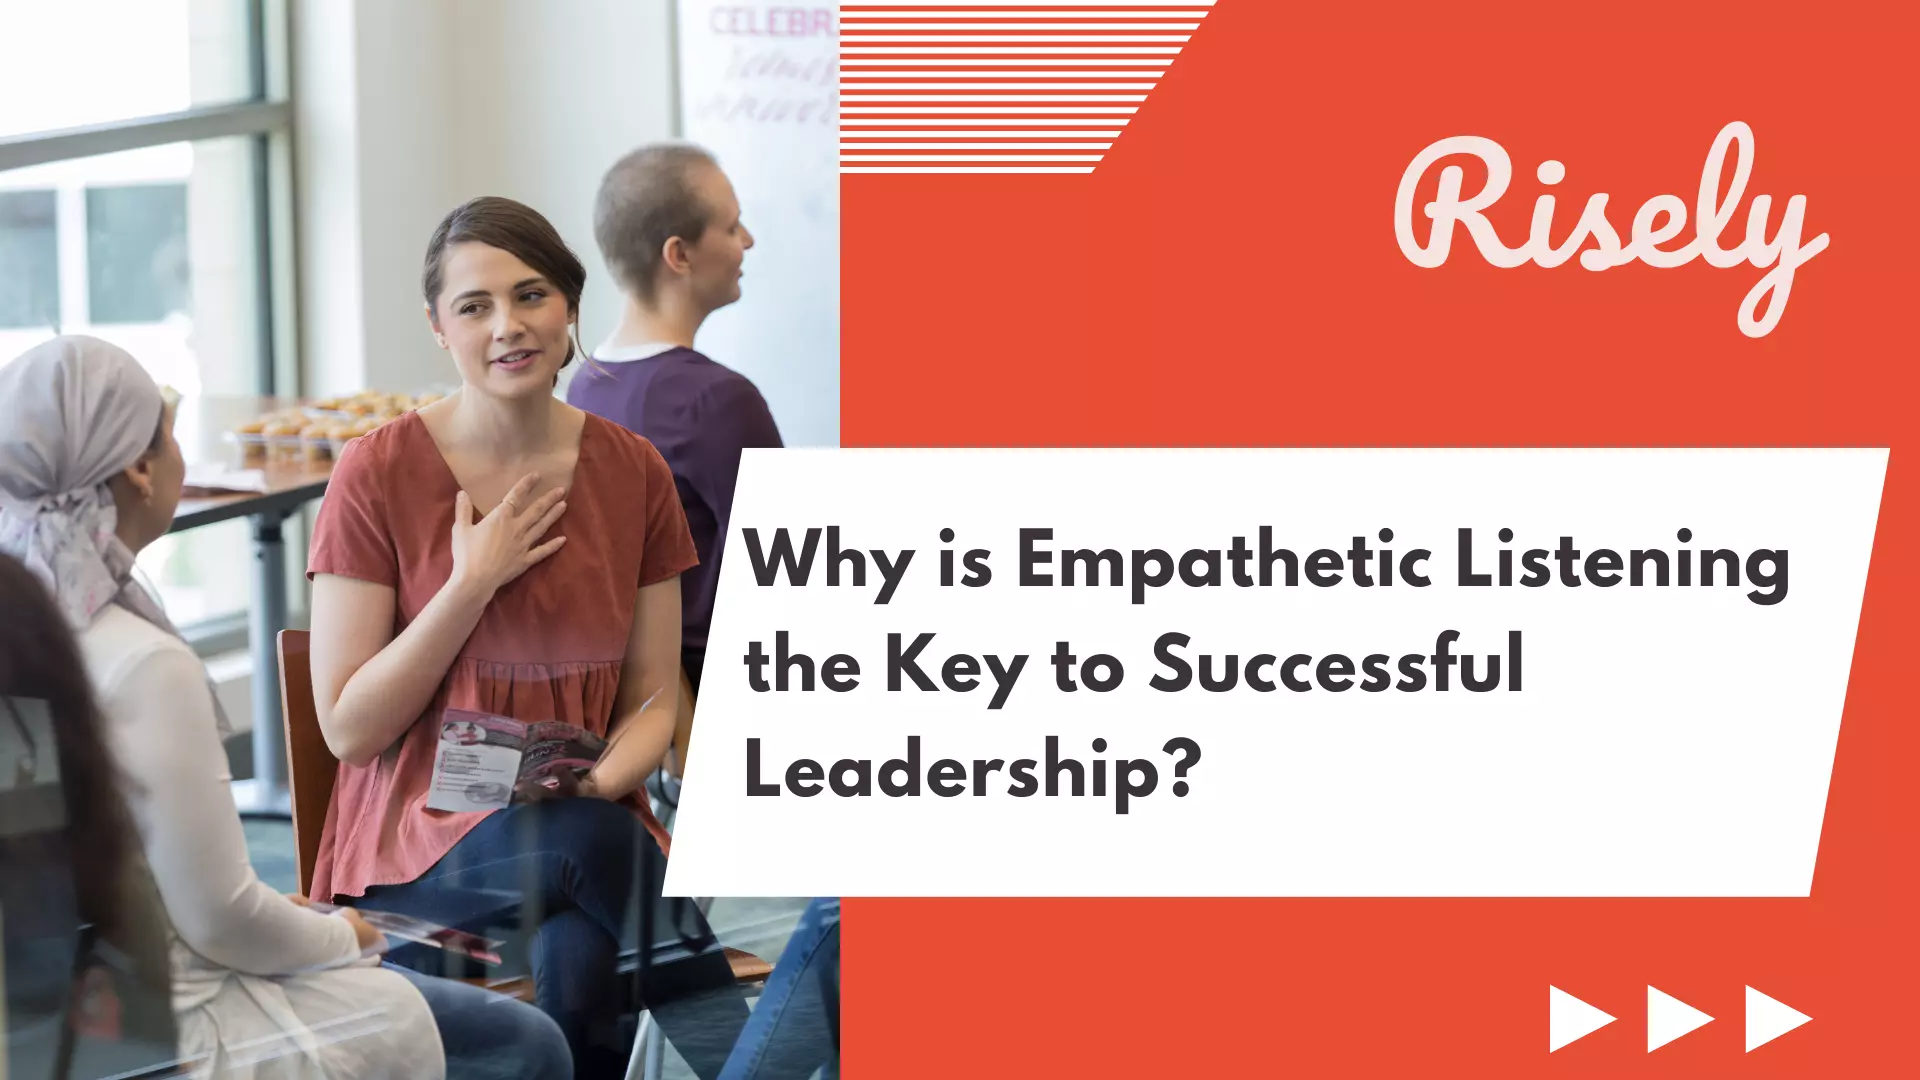 Why is empathetic listening the key to successful leadership?